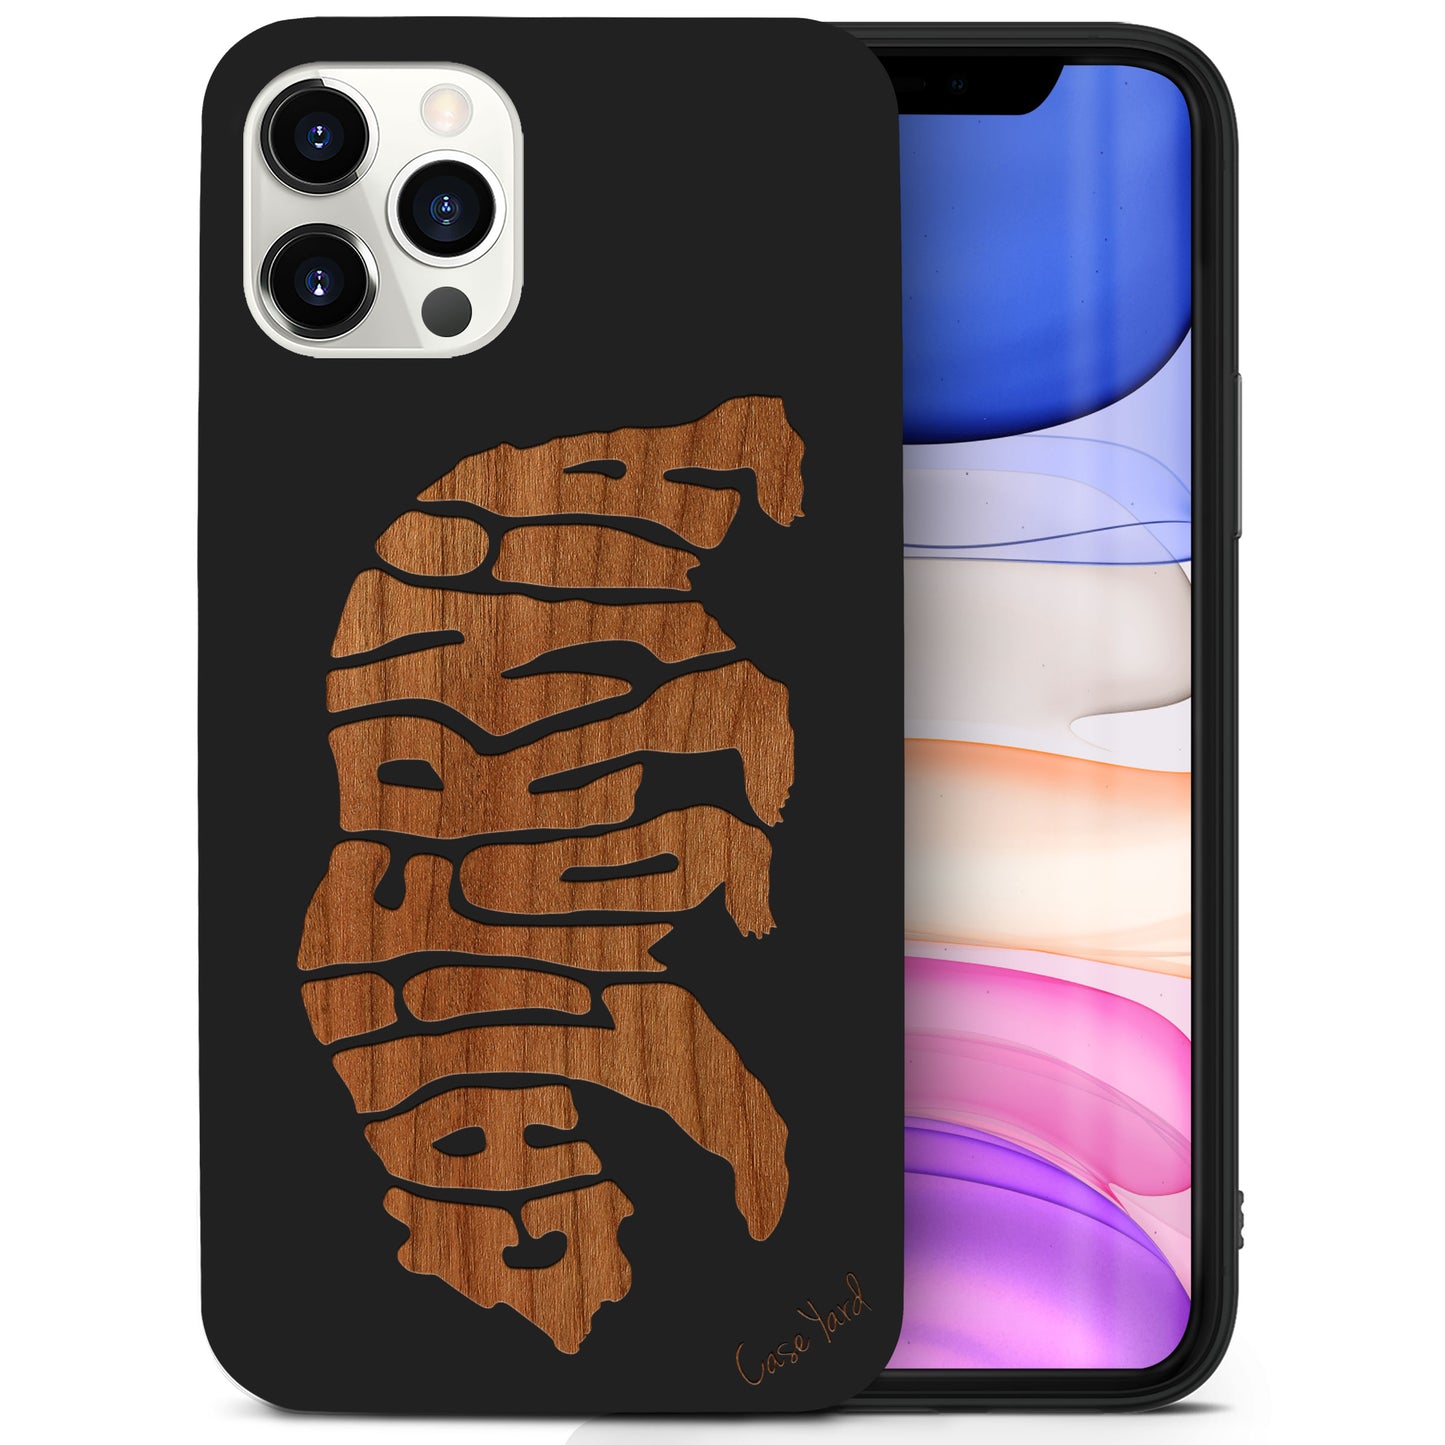 Wooden Cell Phone Case Cover, Laser Engraved case for iPhone & Samsung phone California Bear Letters Design